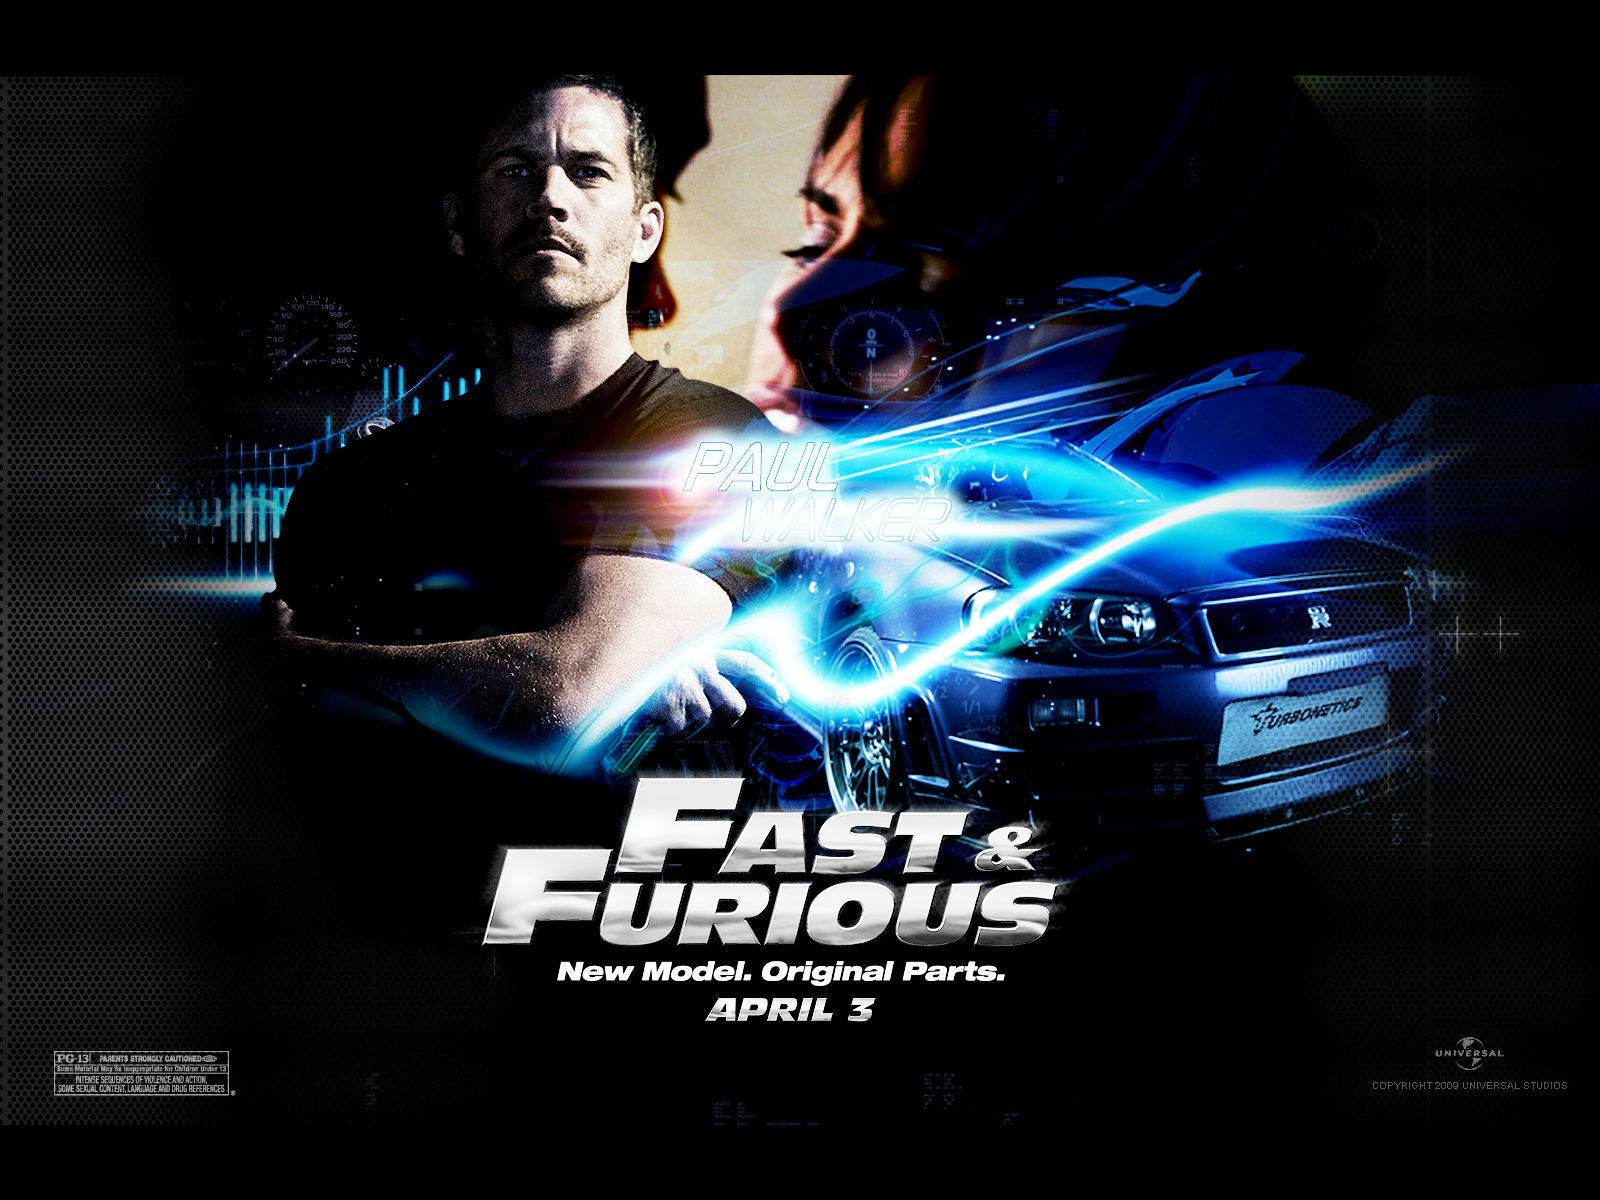 2 fast 2 furious download torrent